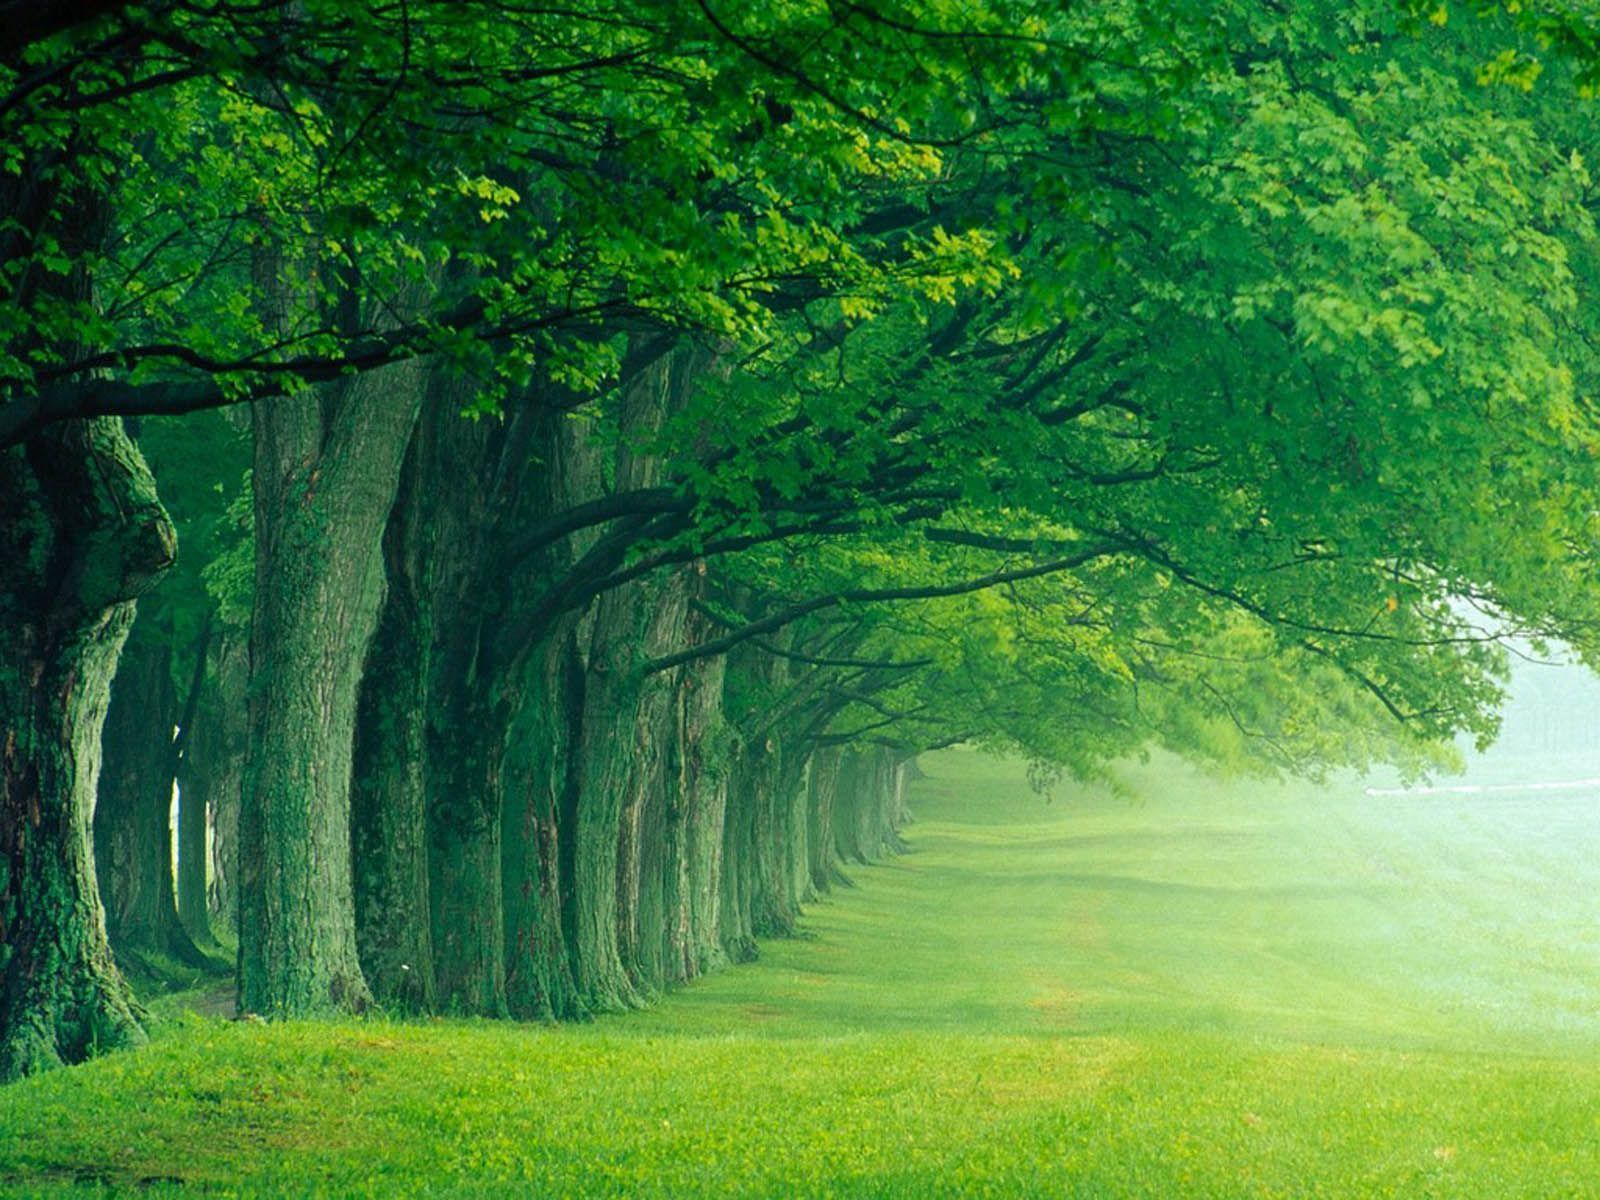 Green Tree HD Wallpaper - HD Wallpapers Backgrounds of Your Choice